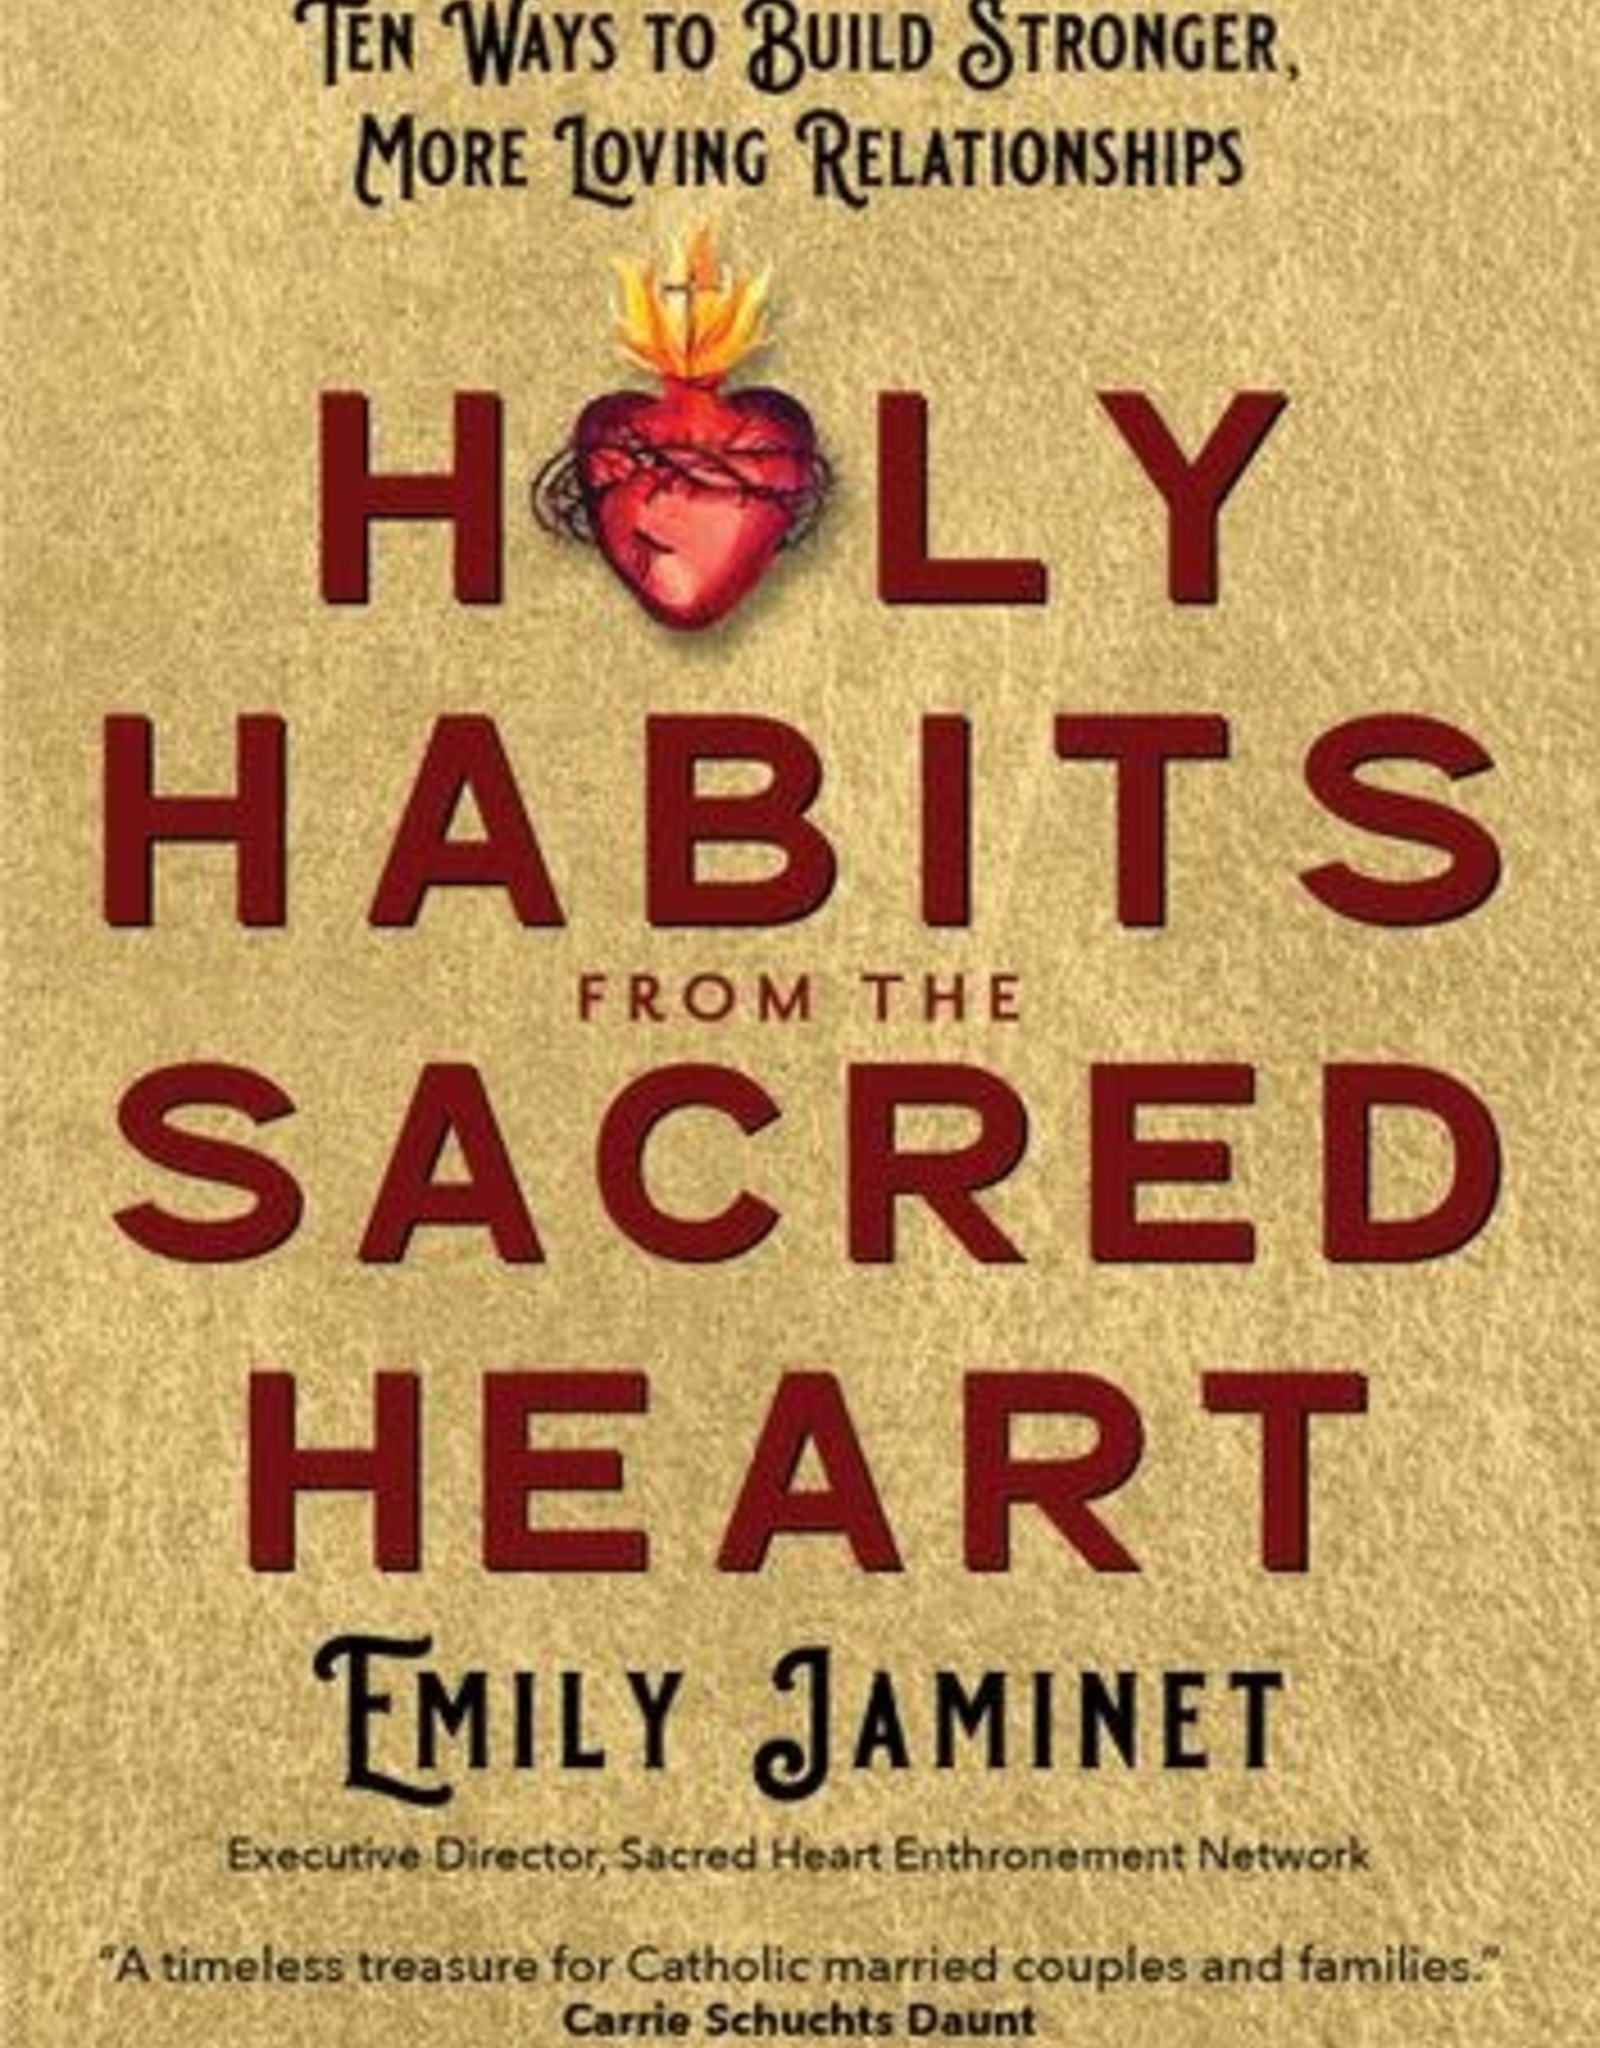 Holy Habits from the Sacred Heart, by Emily Jaminet (paperback)